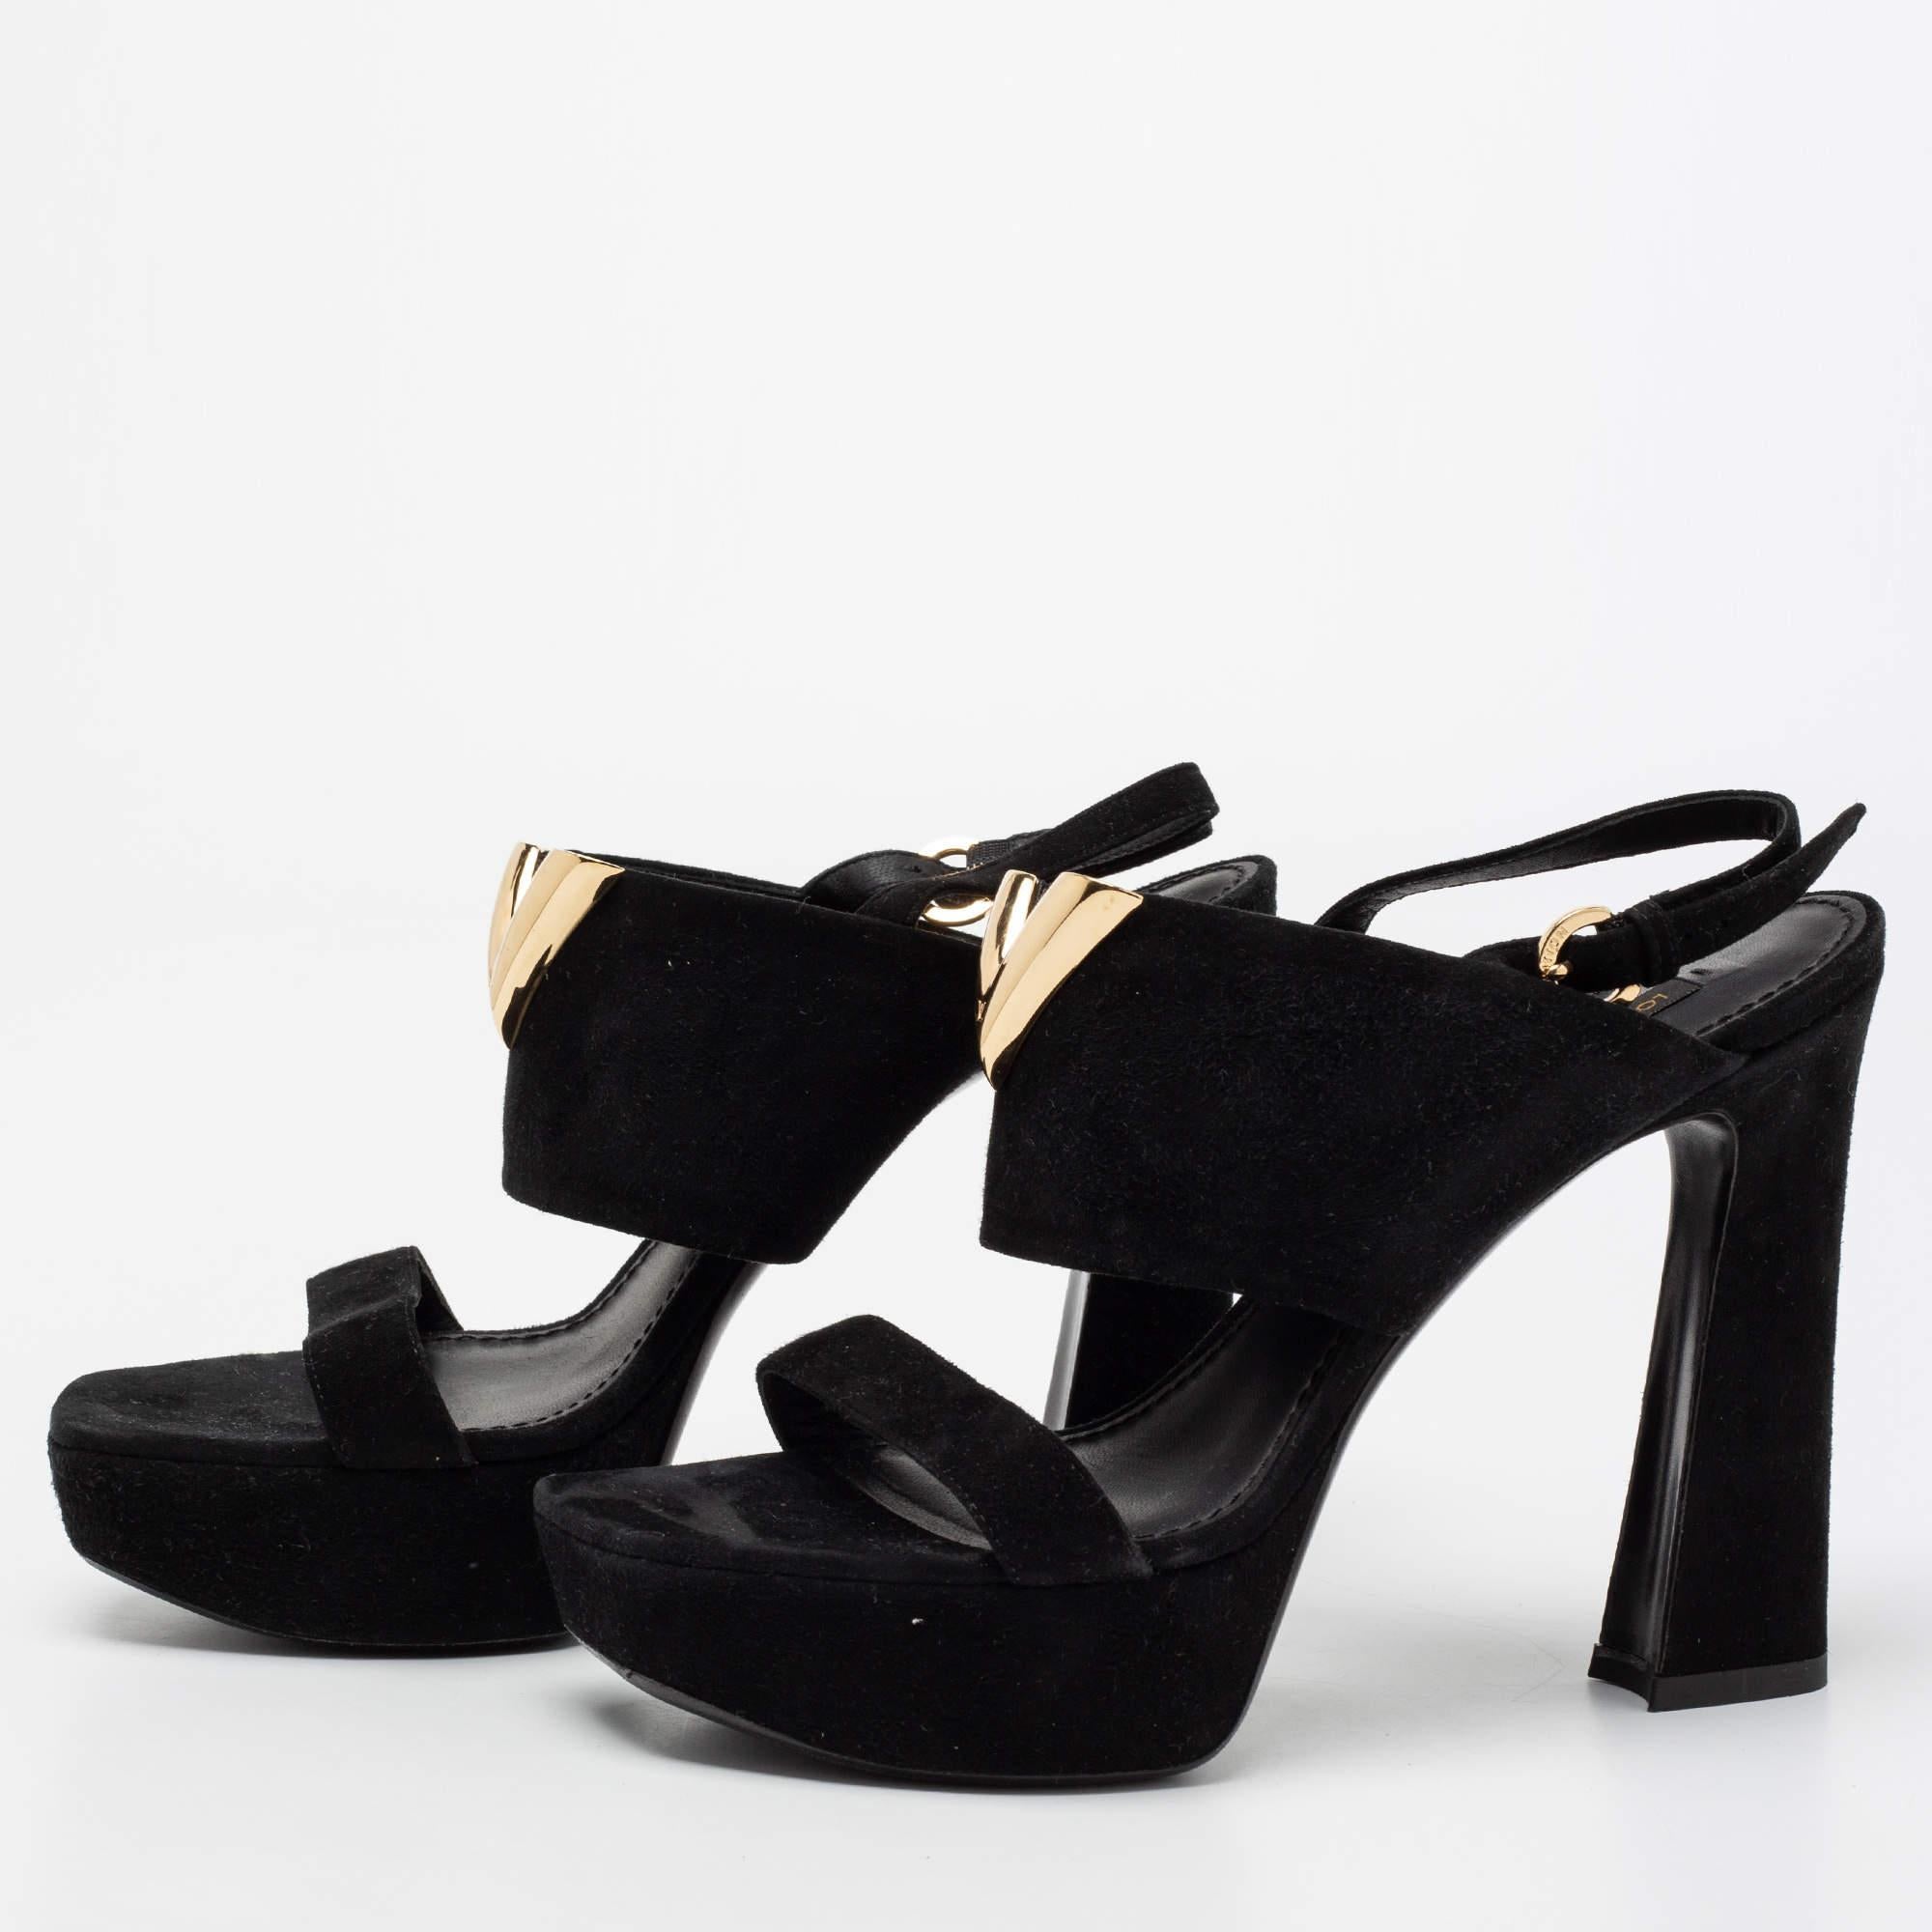 These Louis Vuitton sandals are effortlessly chic in a black shade. Created from suede, the V cut on the upper strap in gold-tone hardware elevates the silhouette, and these shoes are secured with a slingback closure. The platforms and 12cm heels of